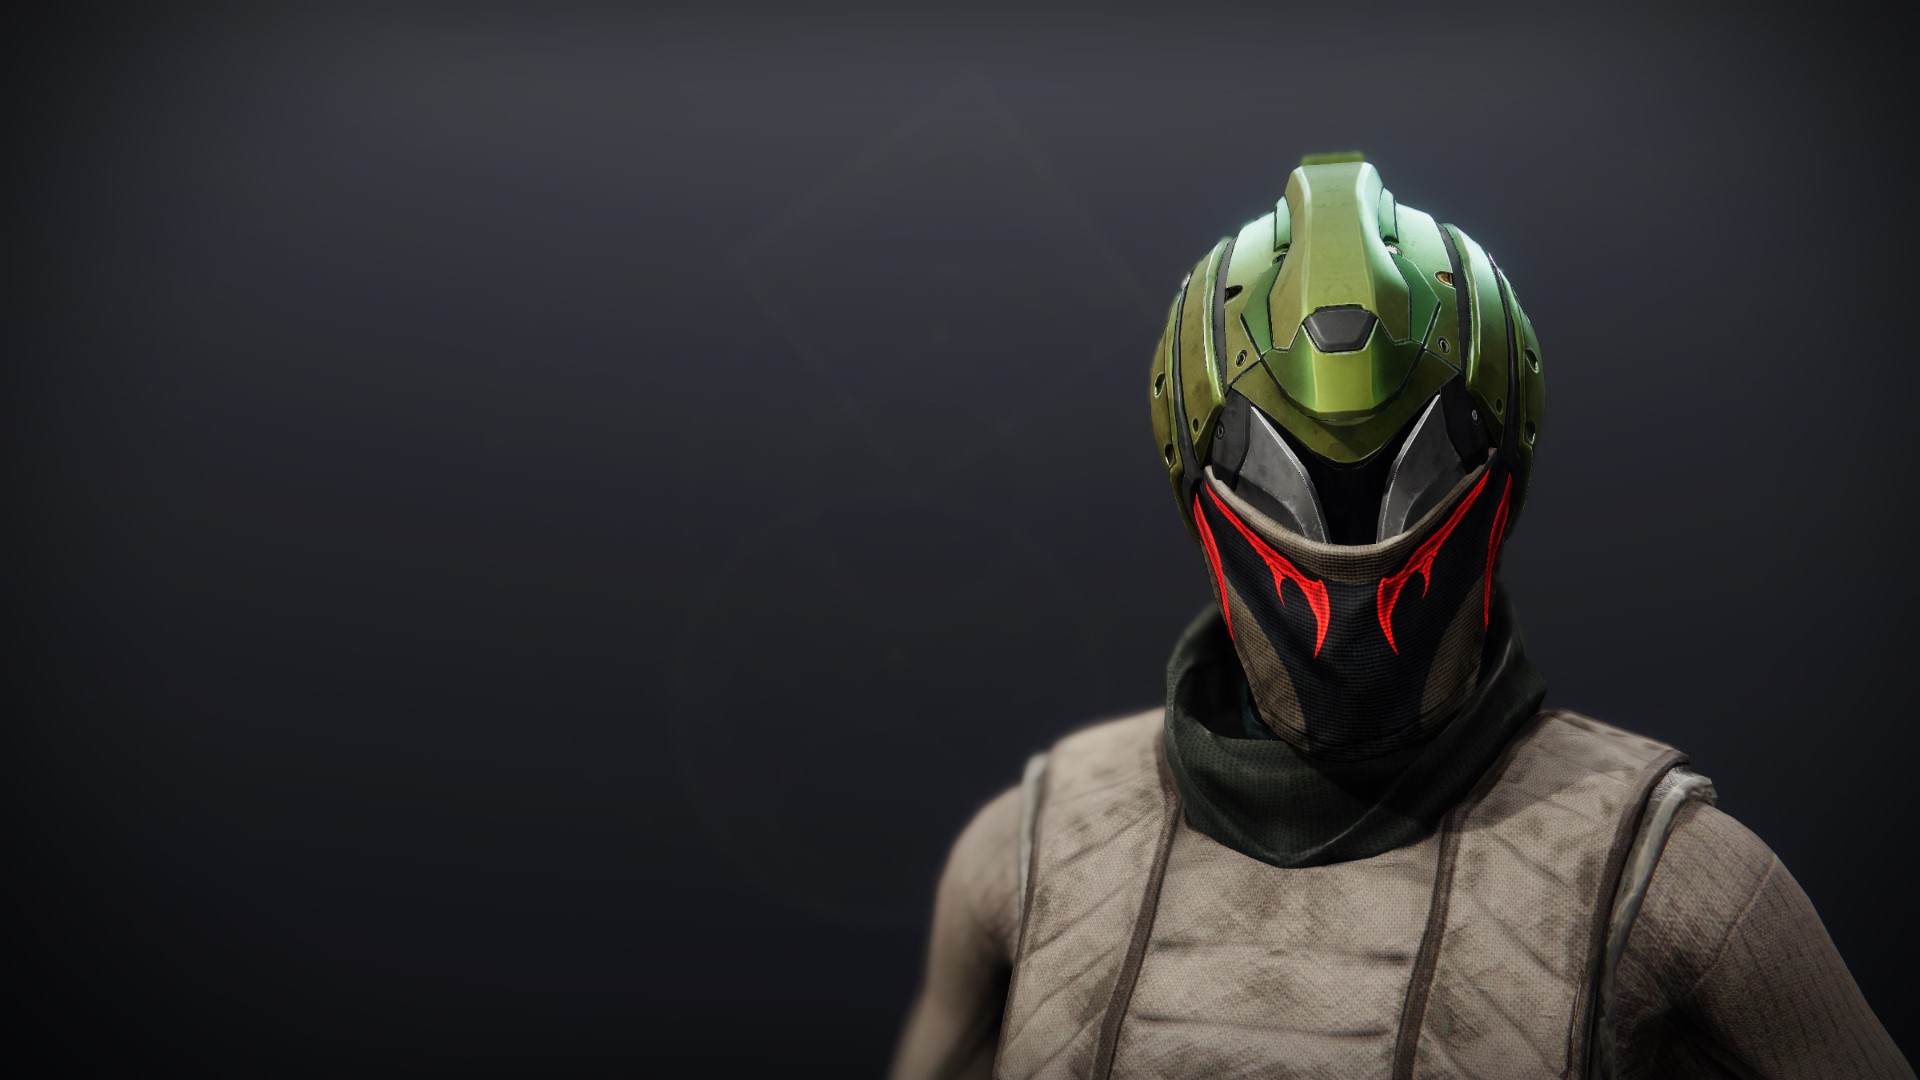 An in-game render of the Illicit Invader Hood.